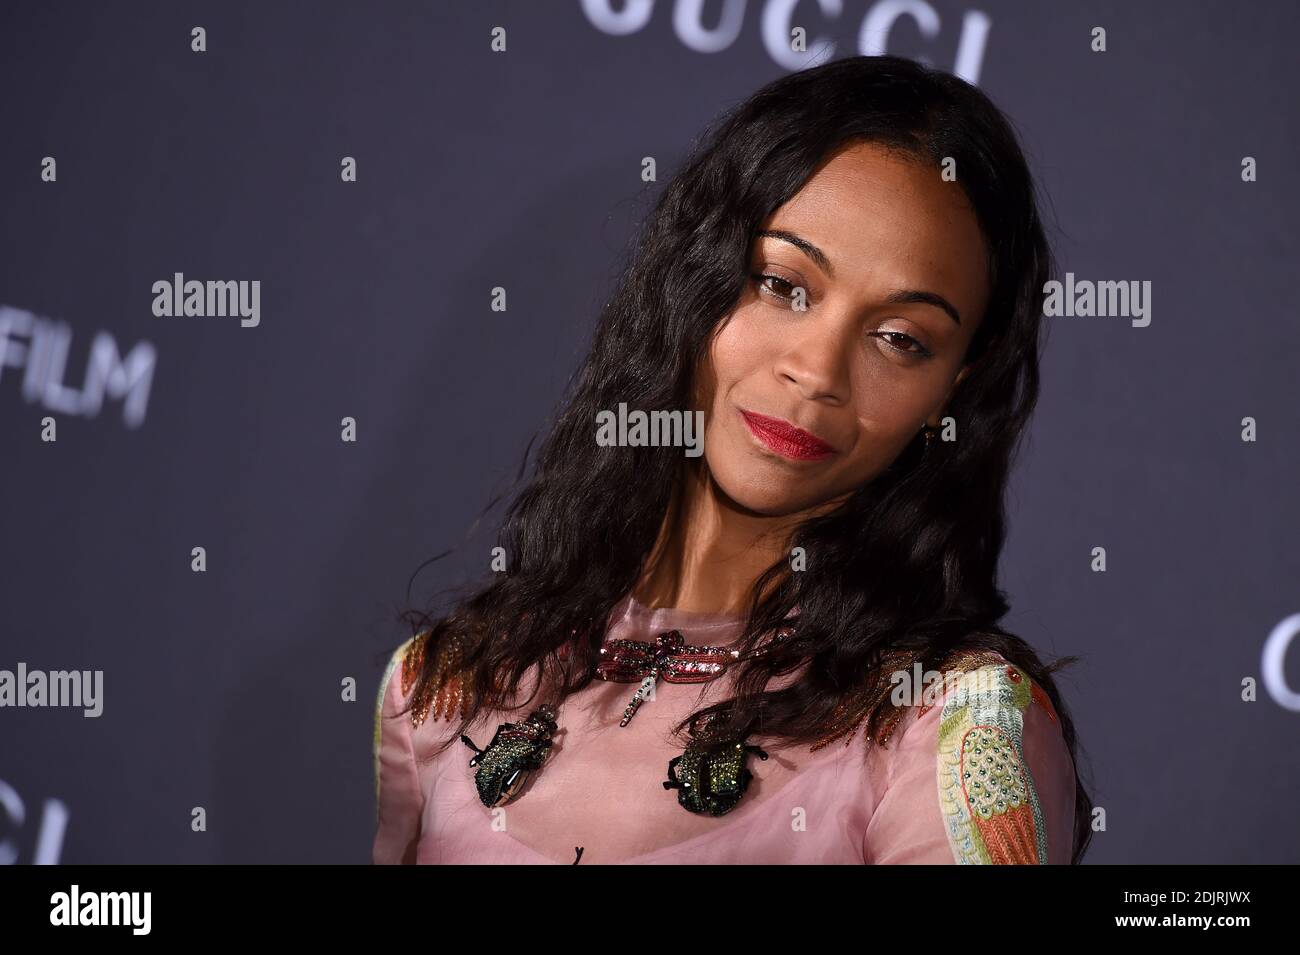 Zoe Saldana attends the 2016 LACMA Art + Film Gala honoring Robert Irwin and Kathryn Bigelow presented by Gucci at LACMA on October 29, 2016 in Los Angeles, California. Photo by Lionel Hahn/AbacaUsa.com Stock Photo